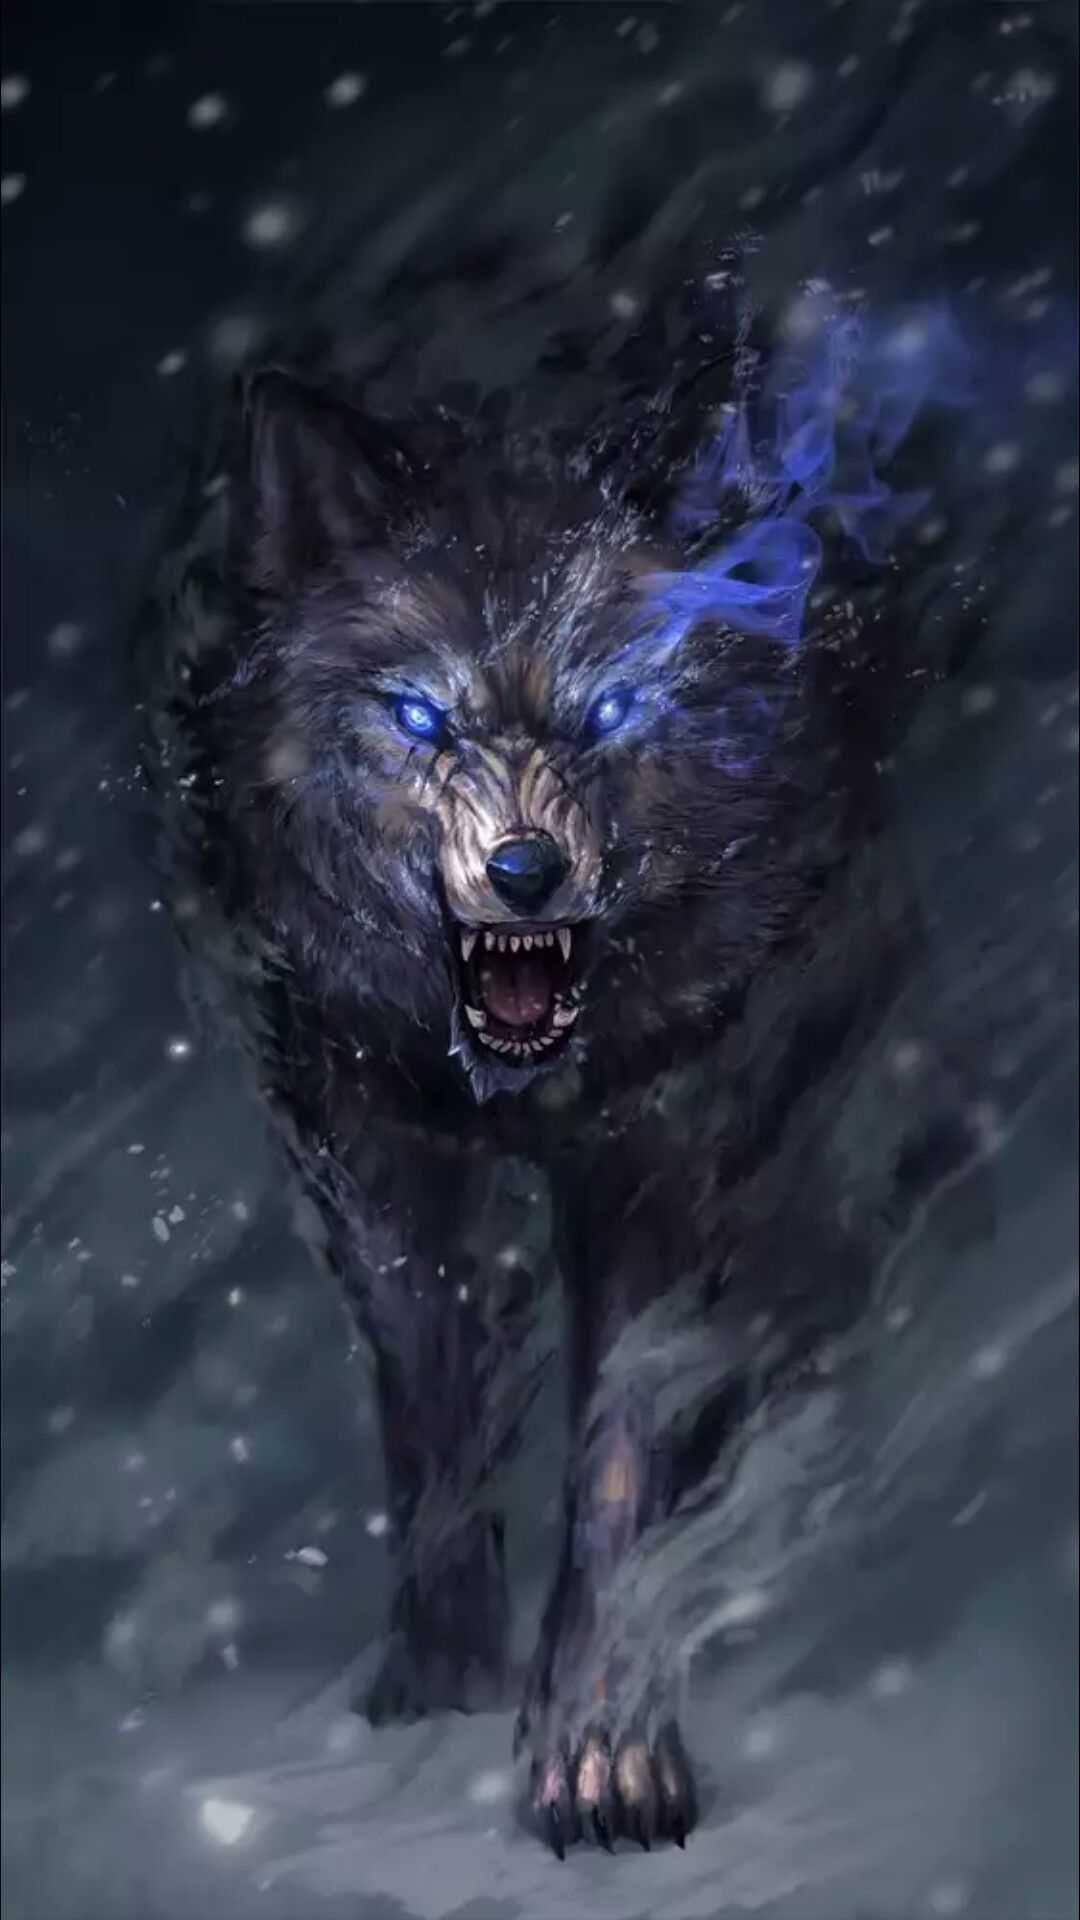 iPhone Wallpaper for iPhone iPhone iPhone X, iPhone XR, iPhone 8 Plus High Quality Wallpaper, iPad Background. Anime wolf, Wolf wallpaper, Fantasy wolf